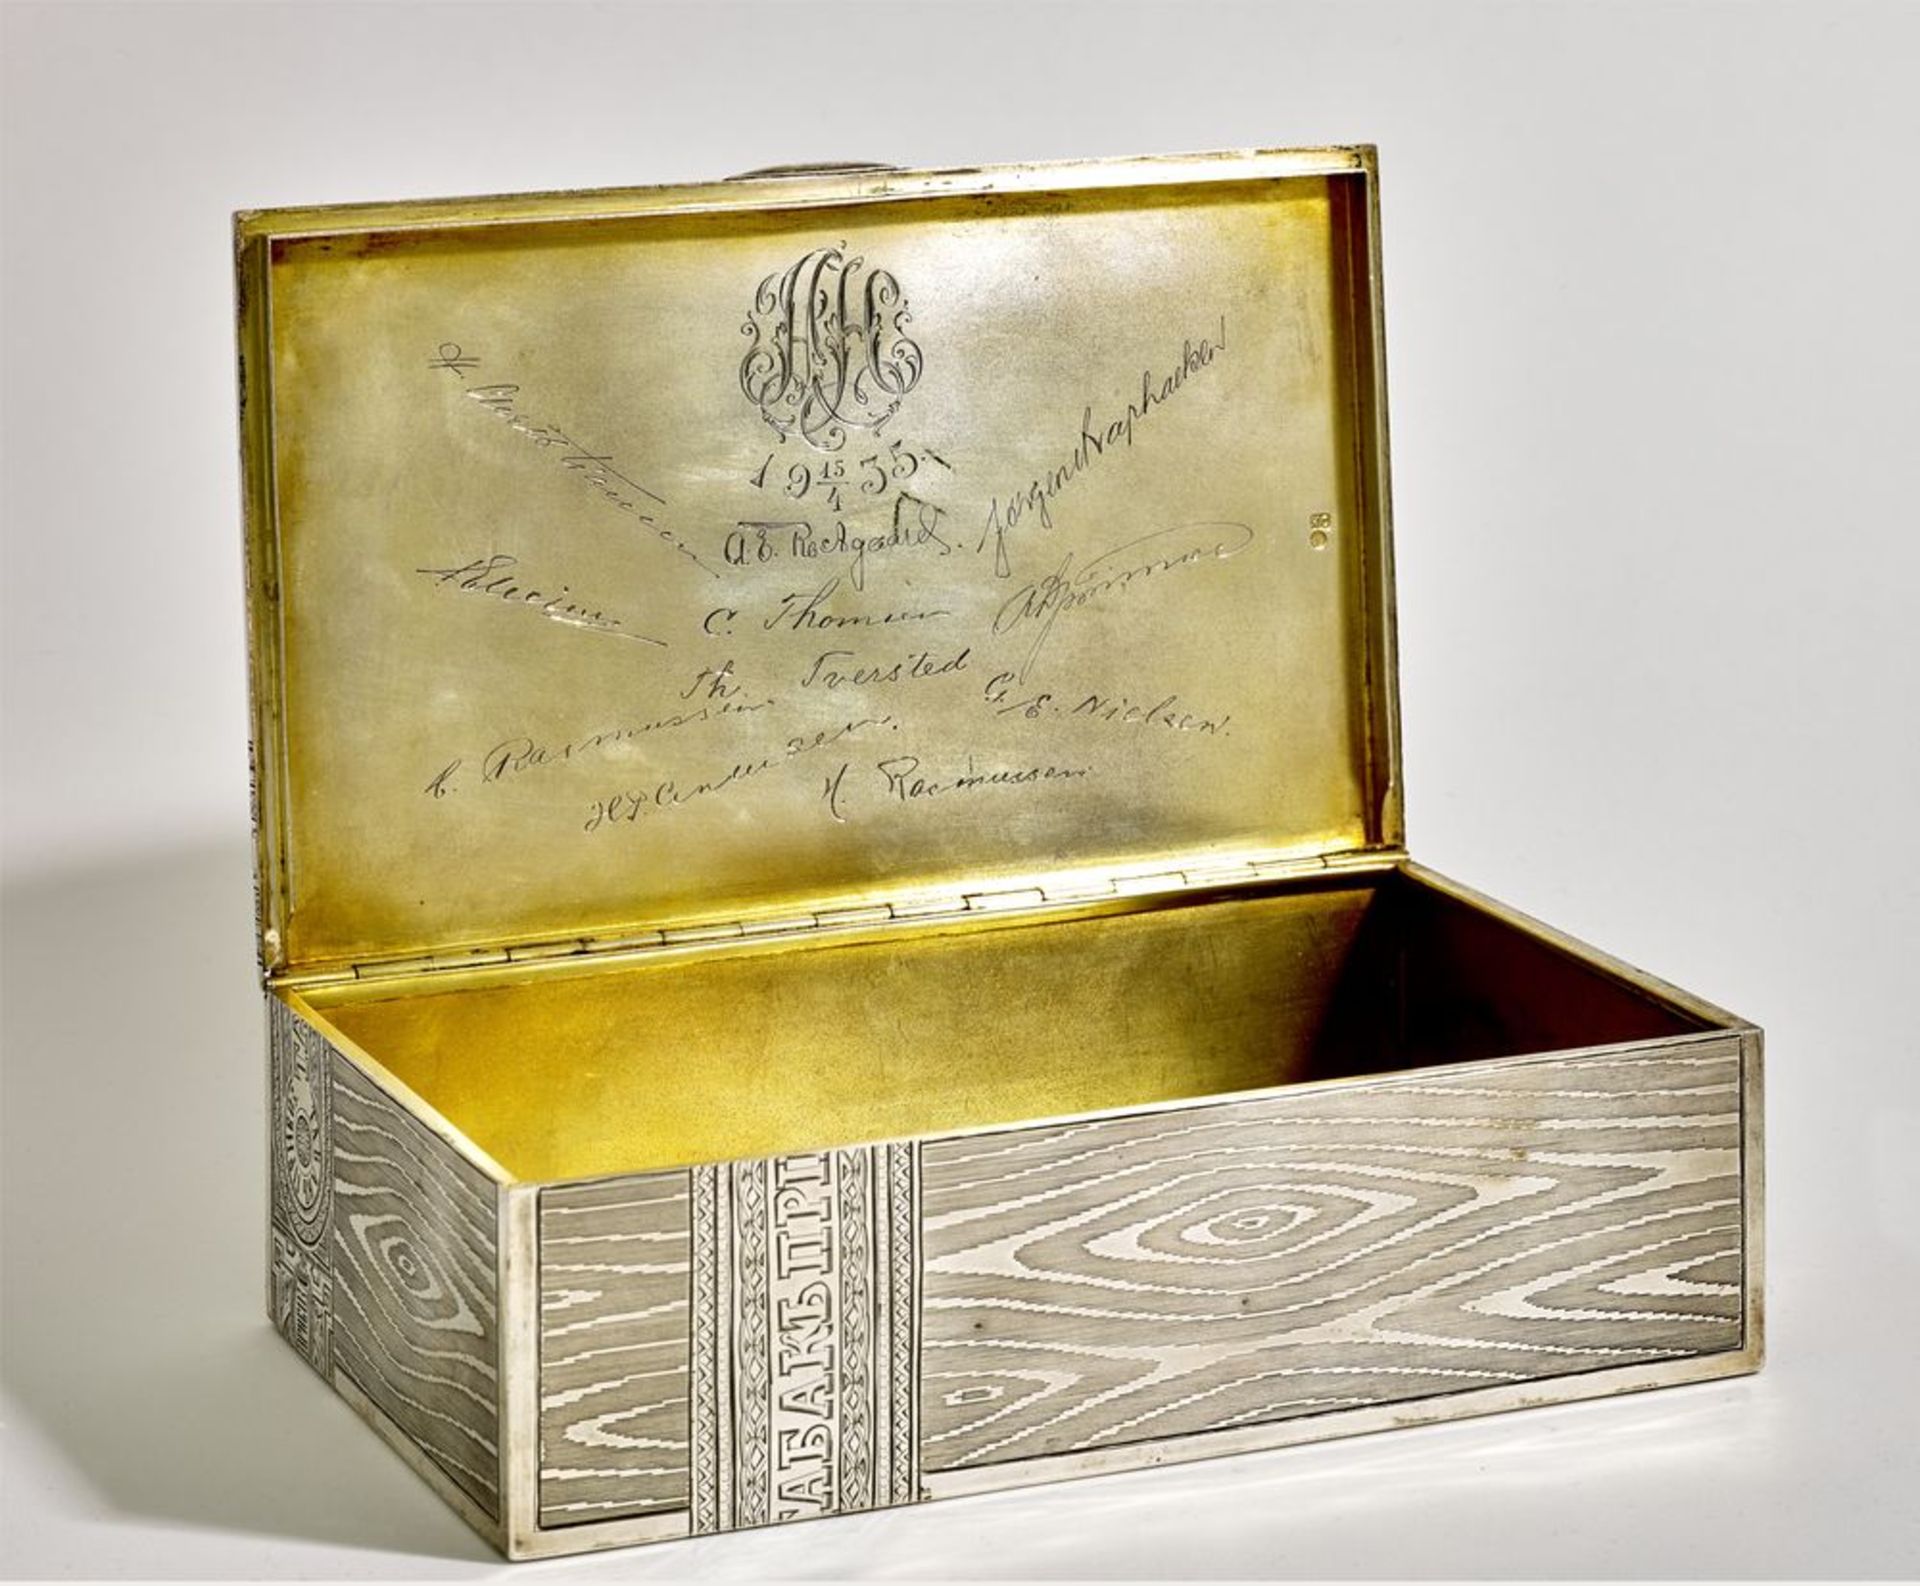 Silver-gilt Trompe l'oeil cigar box, after design of tobacco company H. Upmann with [...]